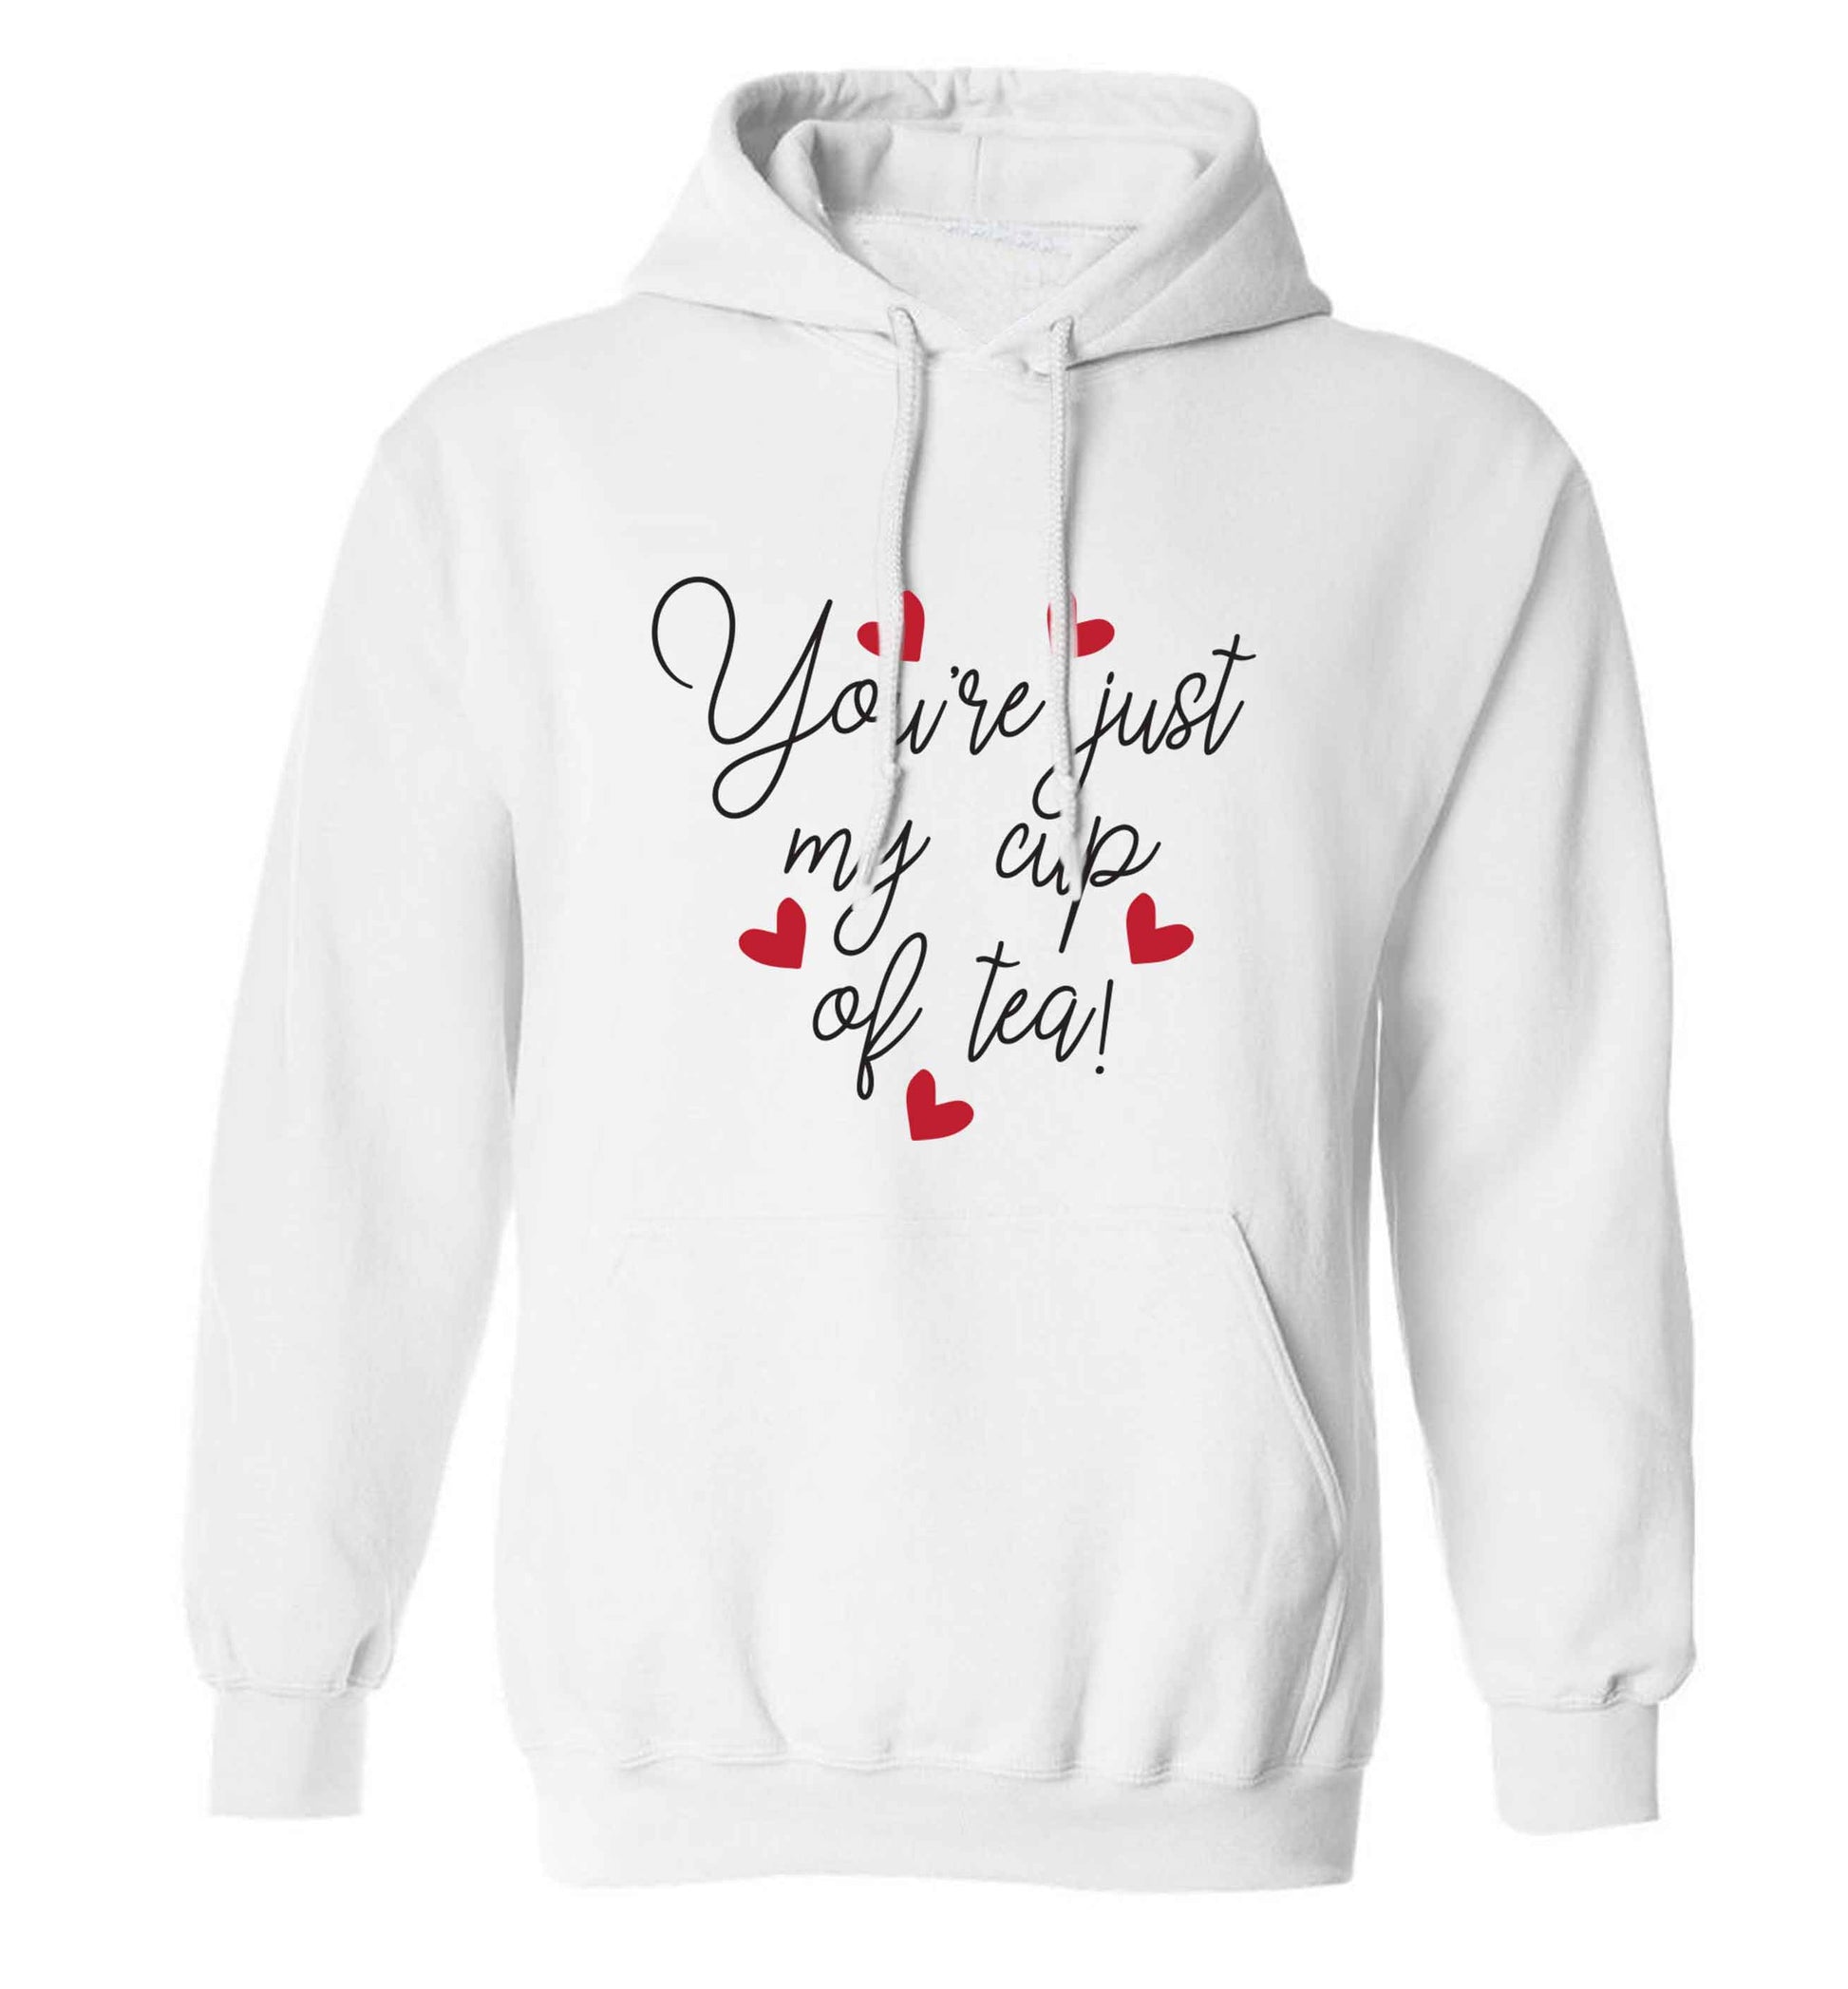 You're just my cup of tea adults unisex white hoodie 2XL